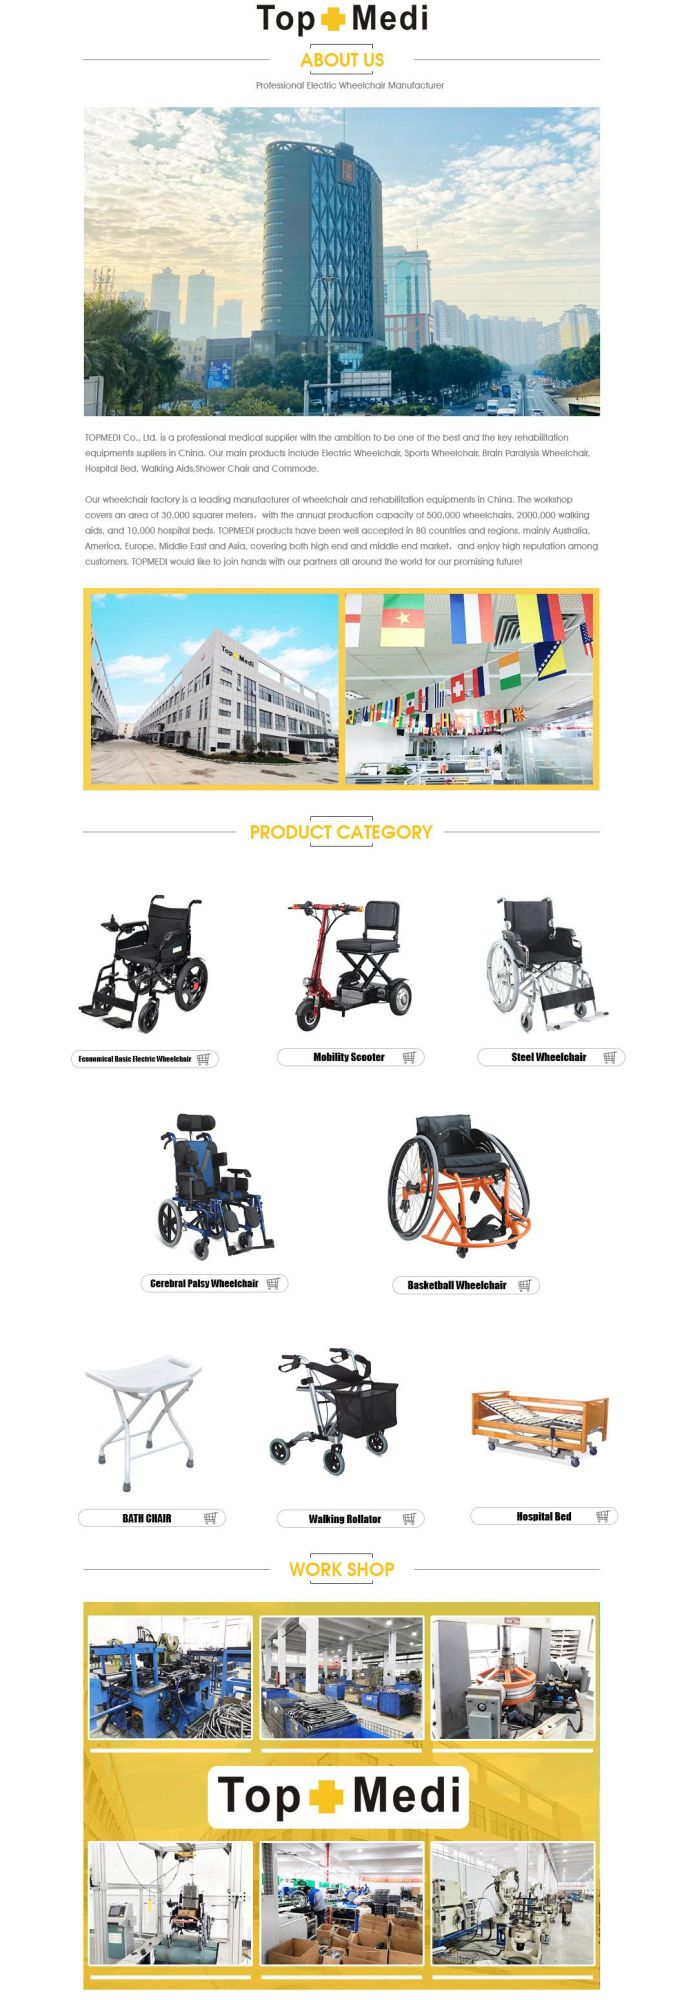 Portable Rolling Walkers Foldable Walker Rollator for Elderly and Disabled People